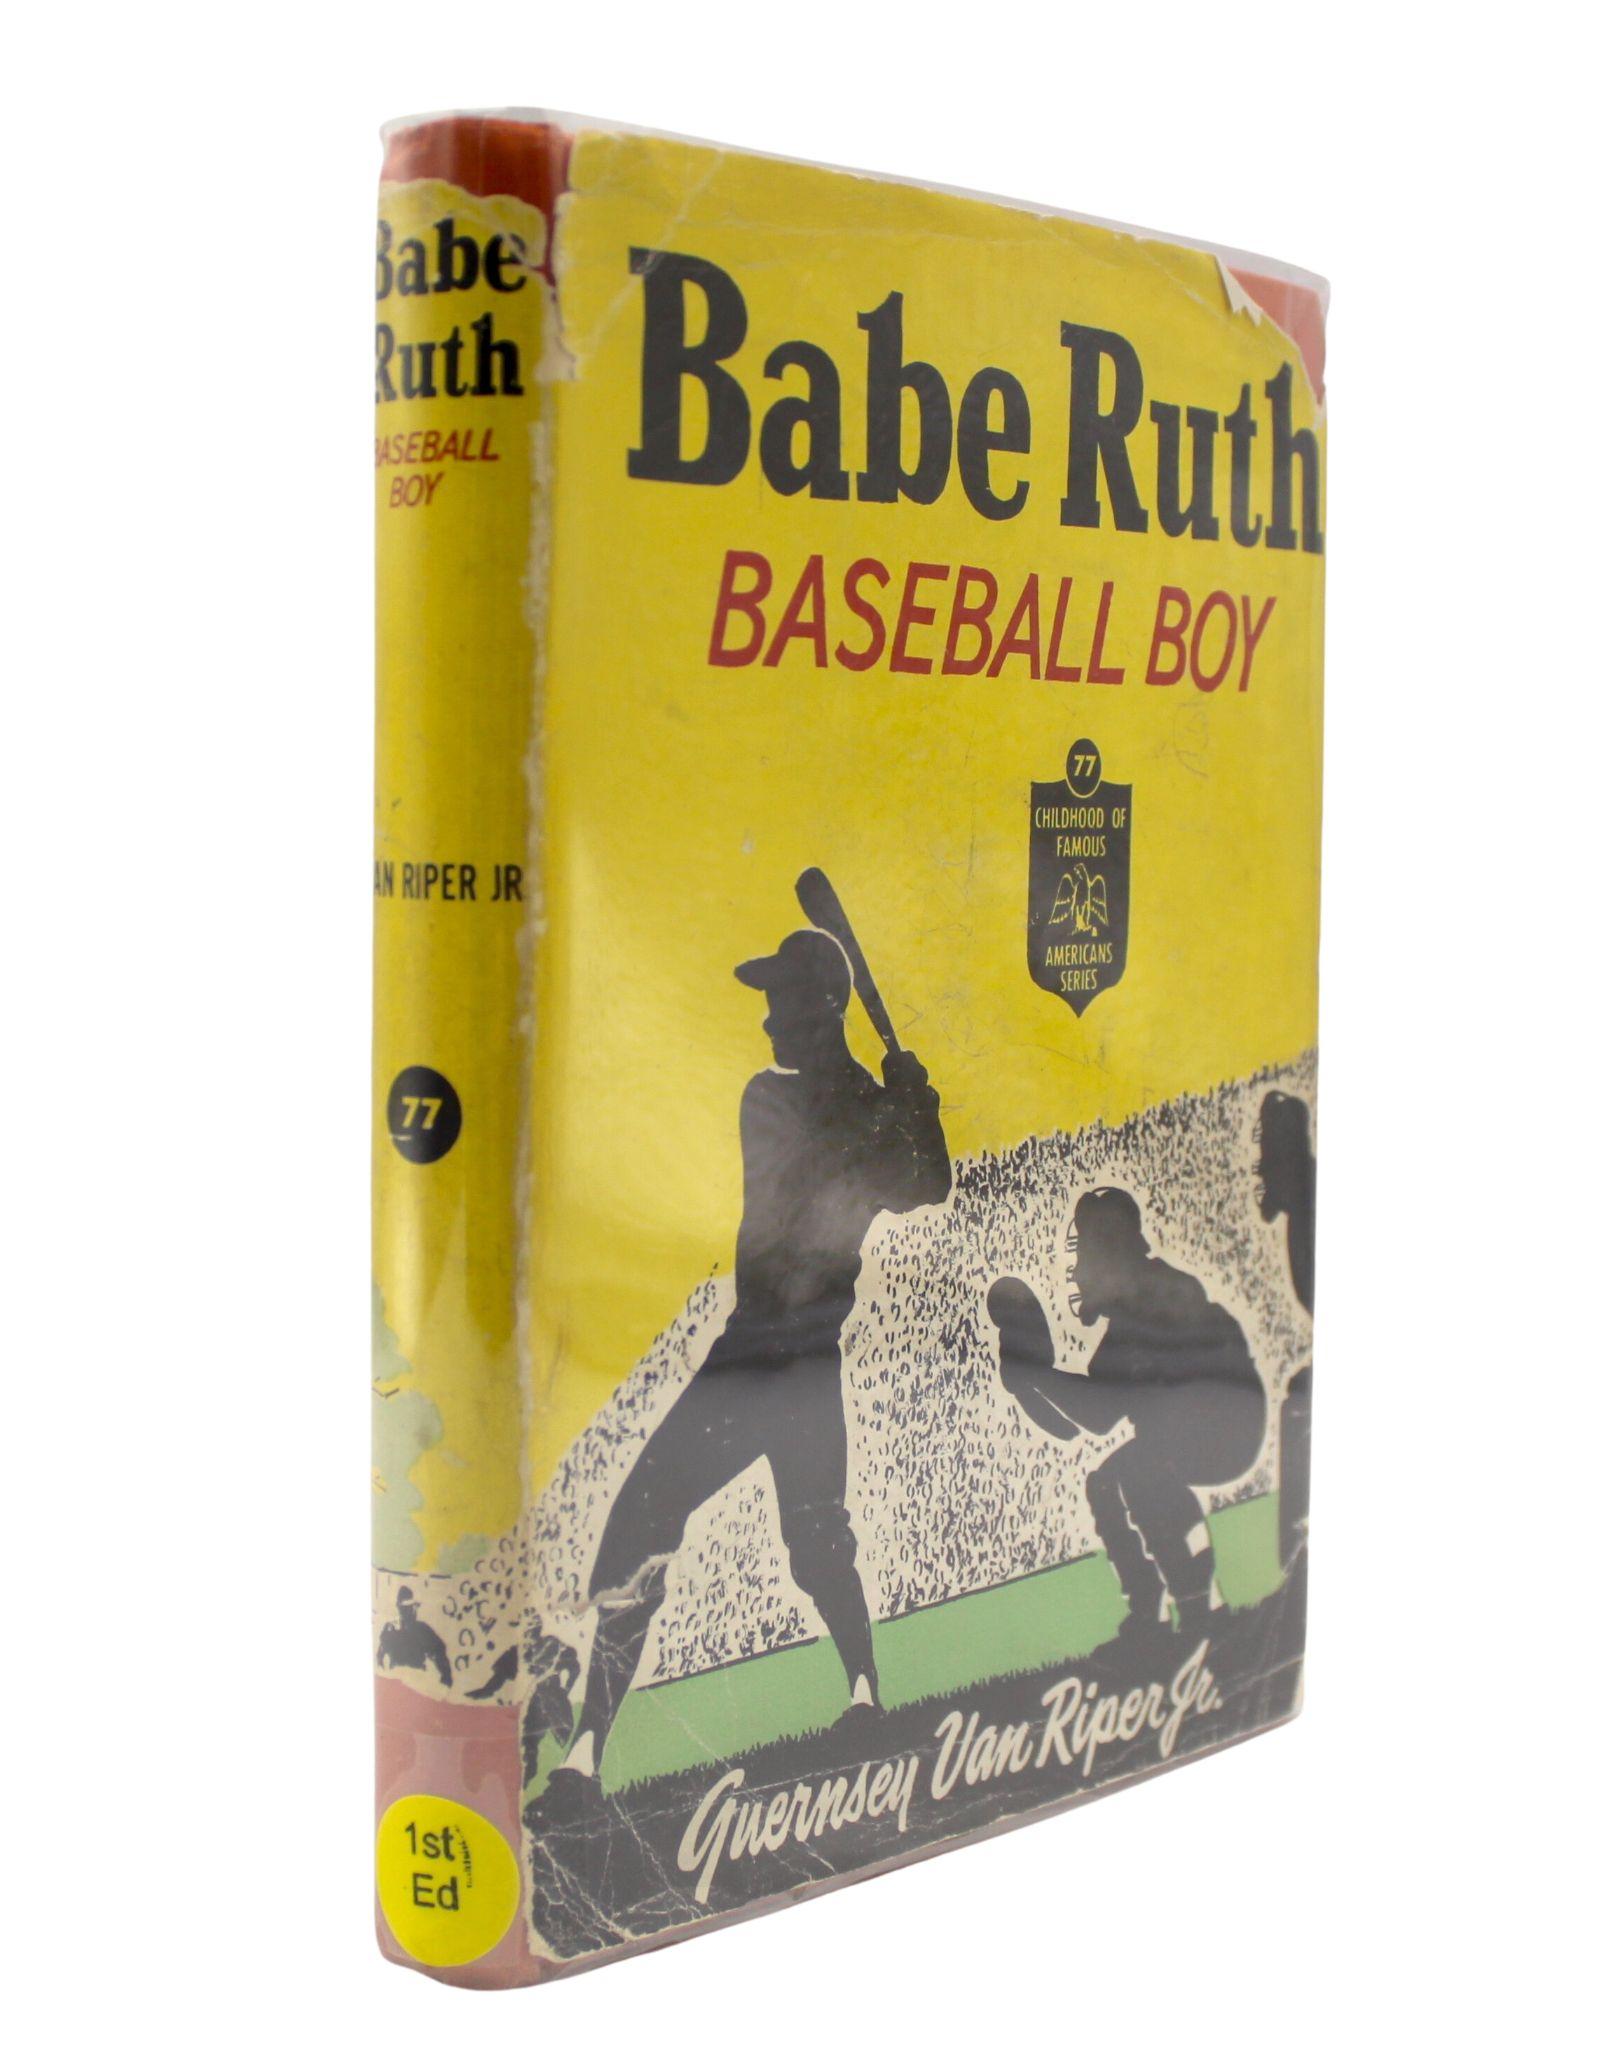 Van Riper Jr., Guernsey. Babe Ruth Baseball Boy. Illustrated by William B. Ricketts. Indianapolis, New York: The Bobbs-Merrill Company, Inc., 1954. Stated First Edition. In orange hardcover boards with black stamped titles to front and black stamped